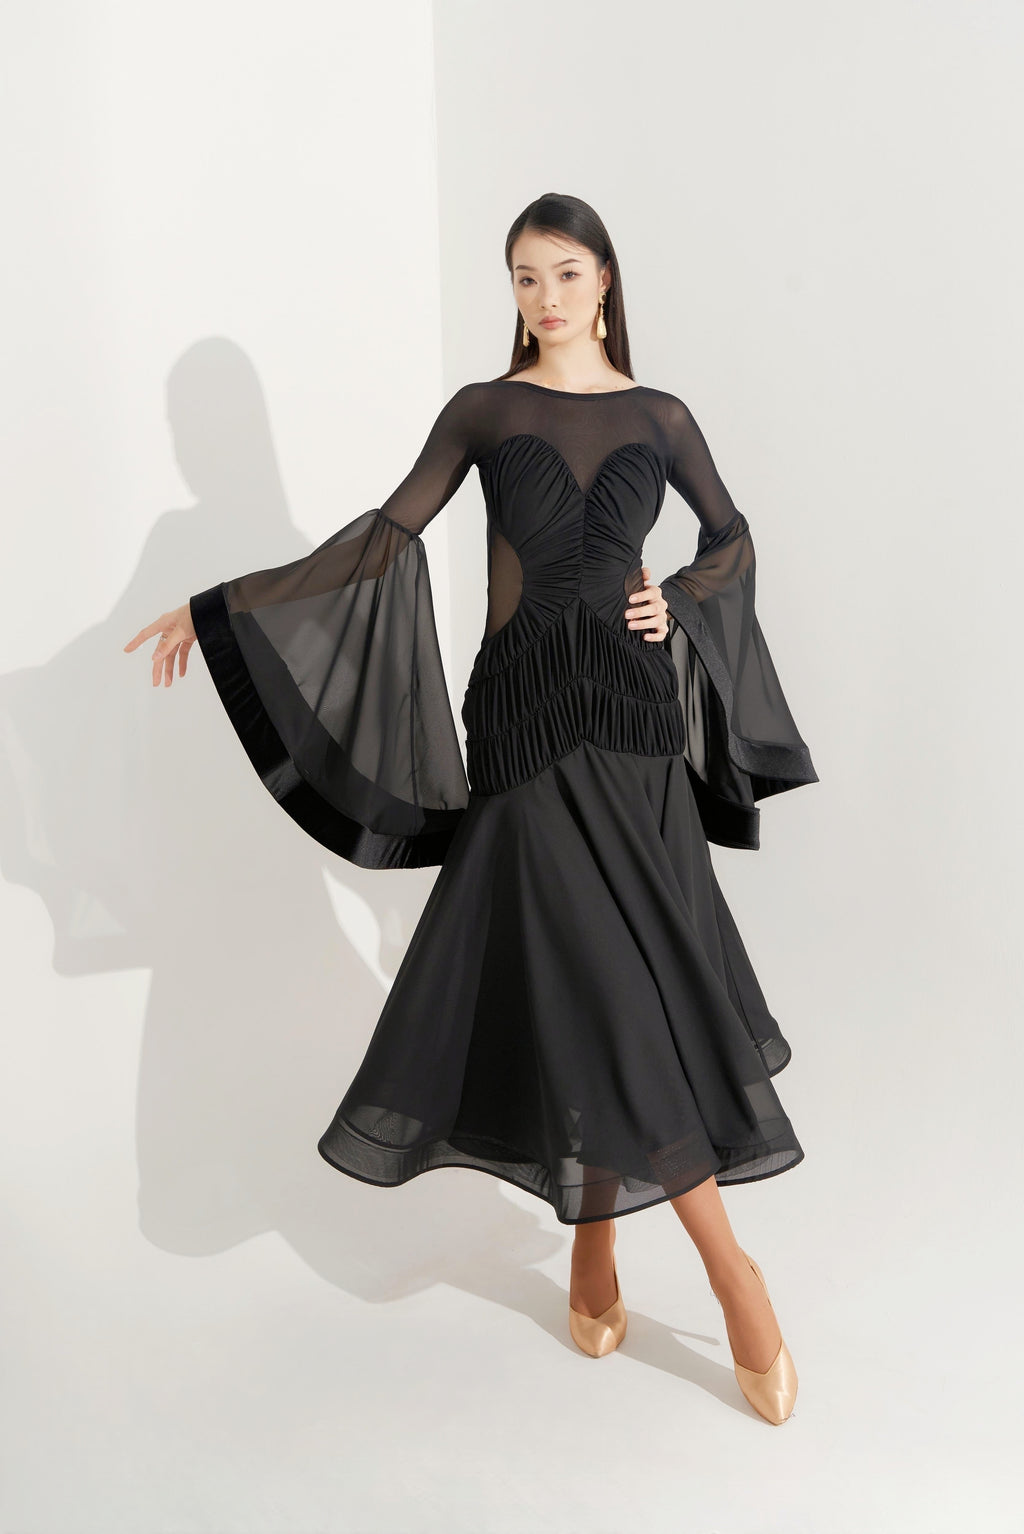 DQ-538 Tailor-Made Flowing Flared Sleeve Cinched Waist Godet Dress